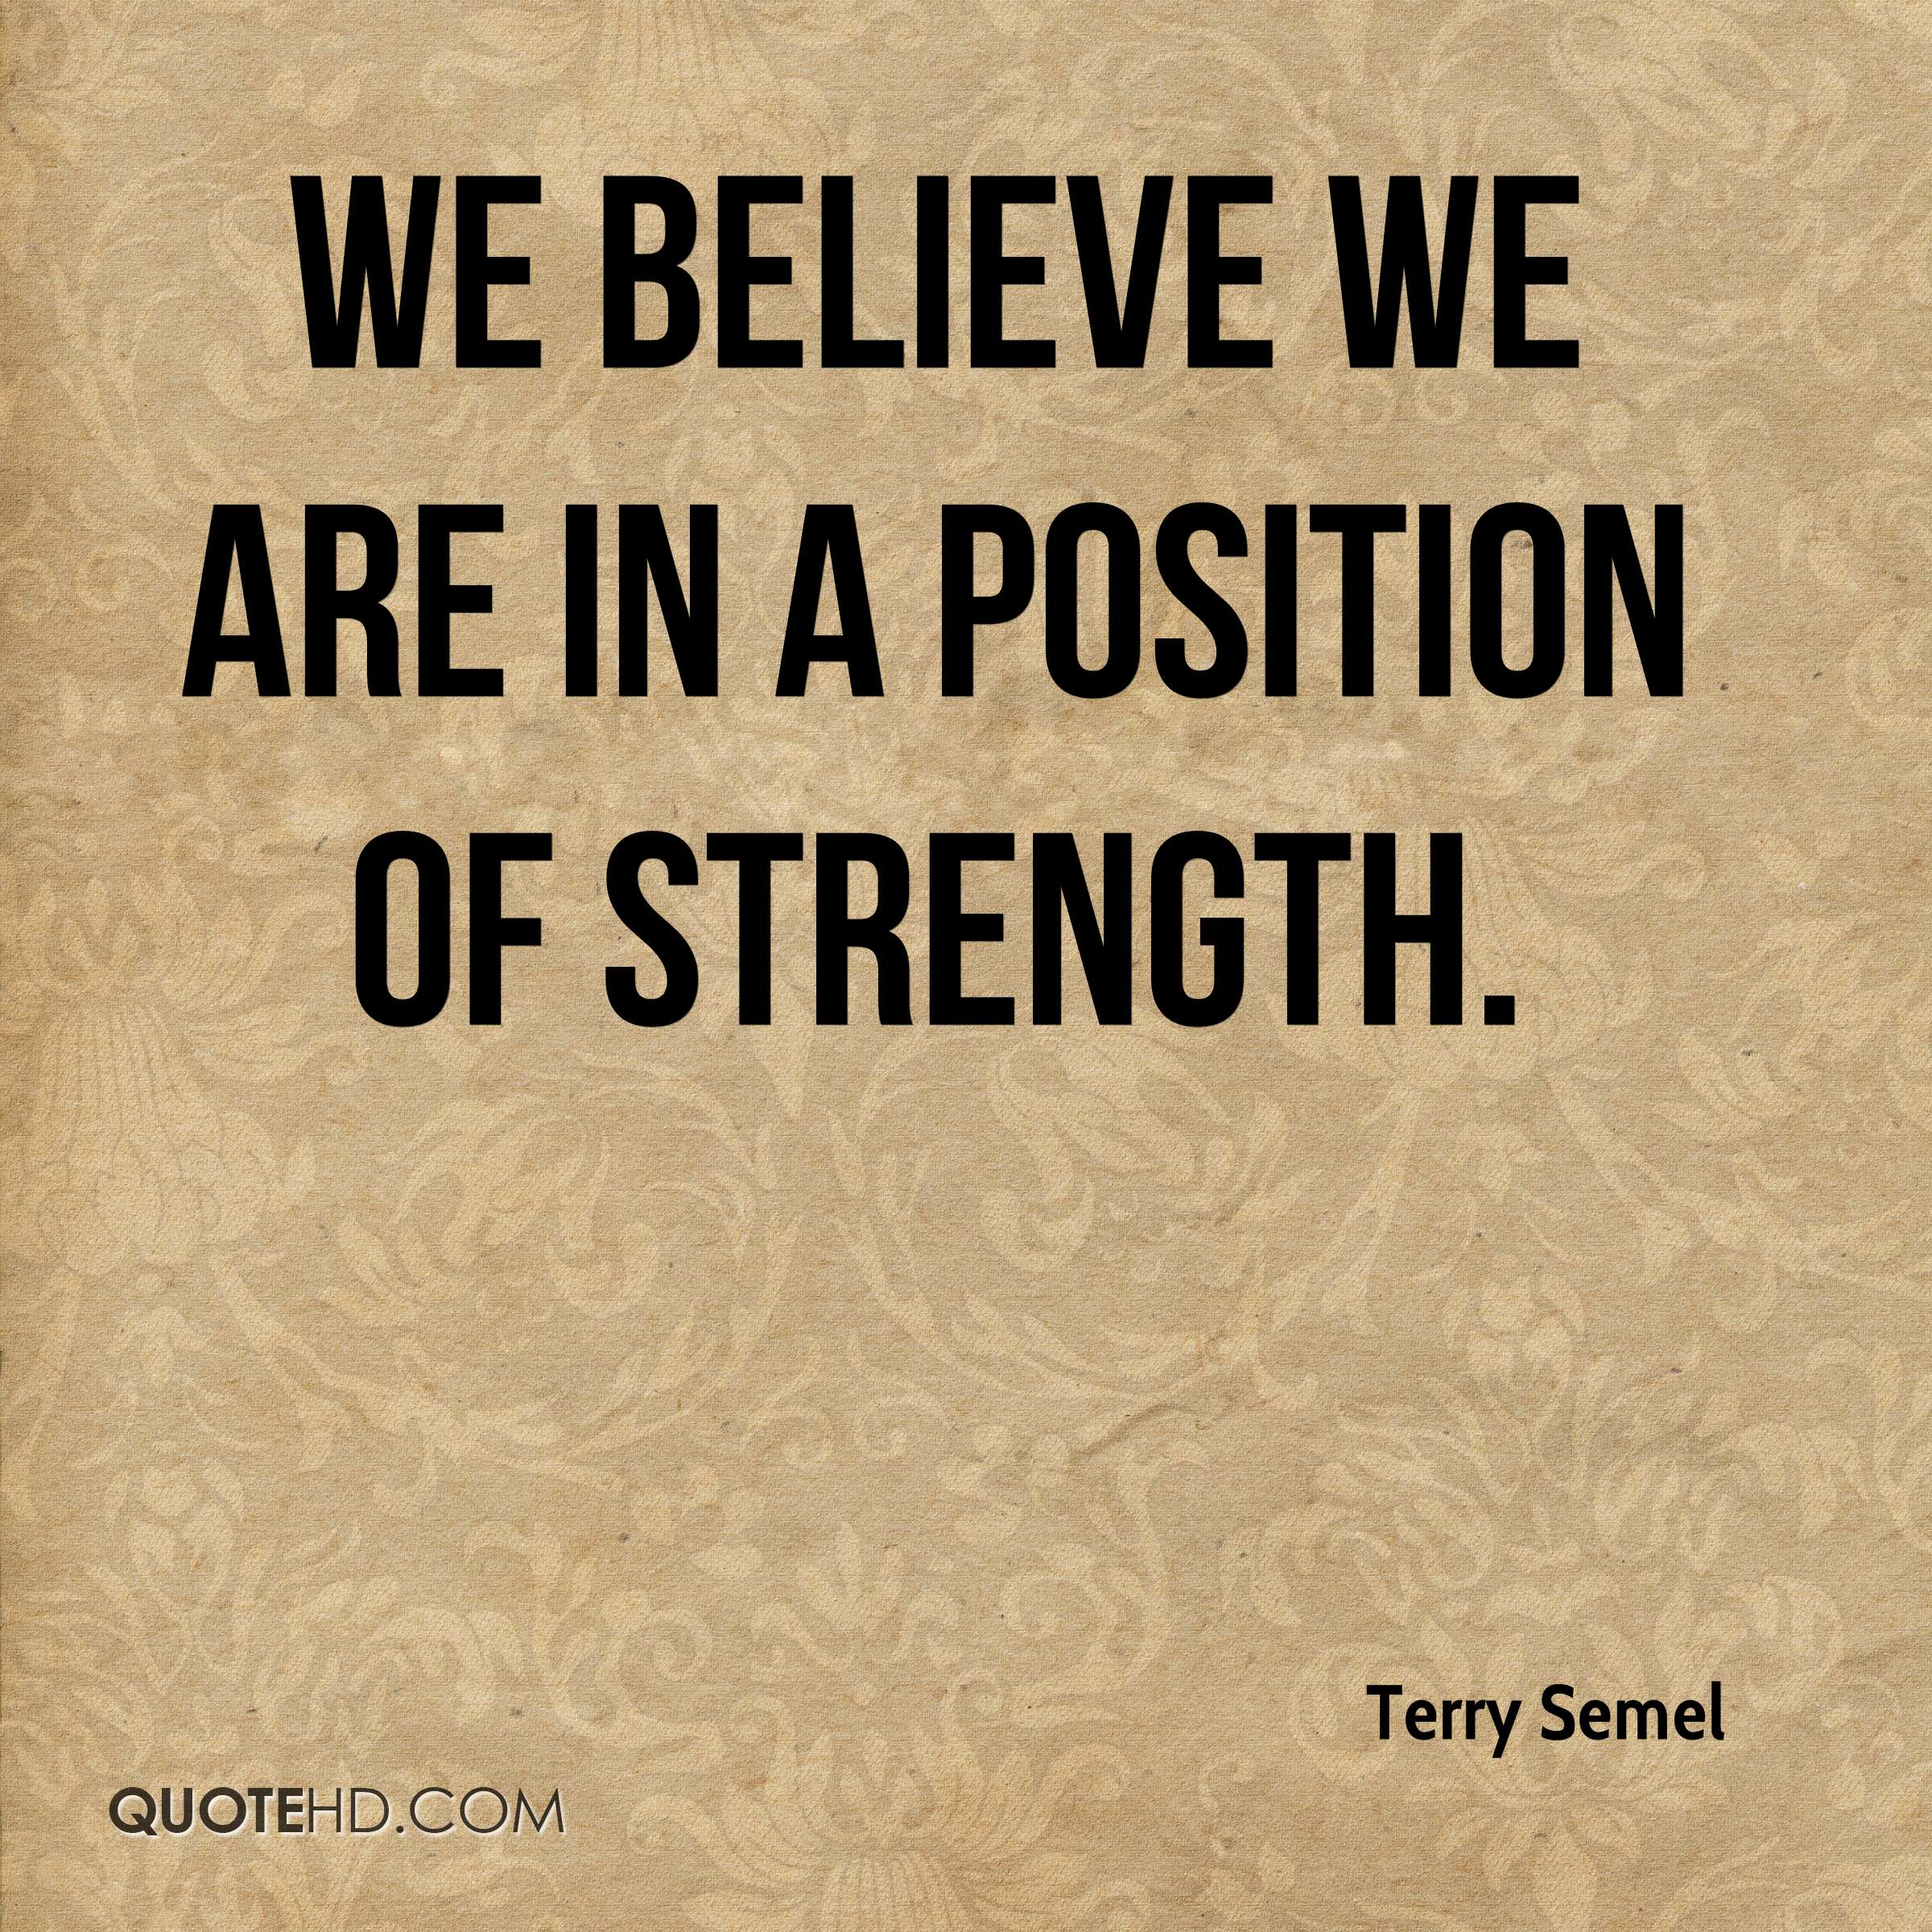 We believe we are in a position of strength. Terry Semel